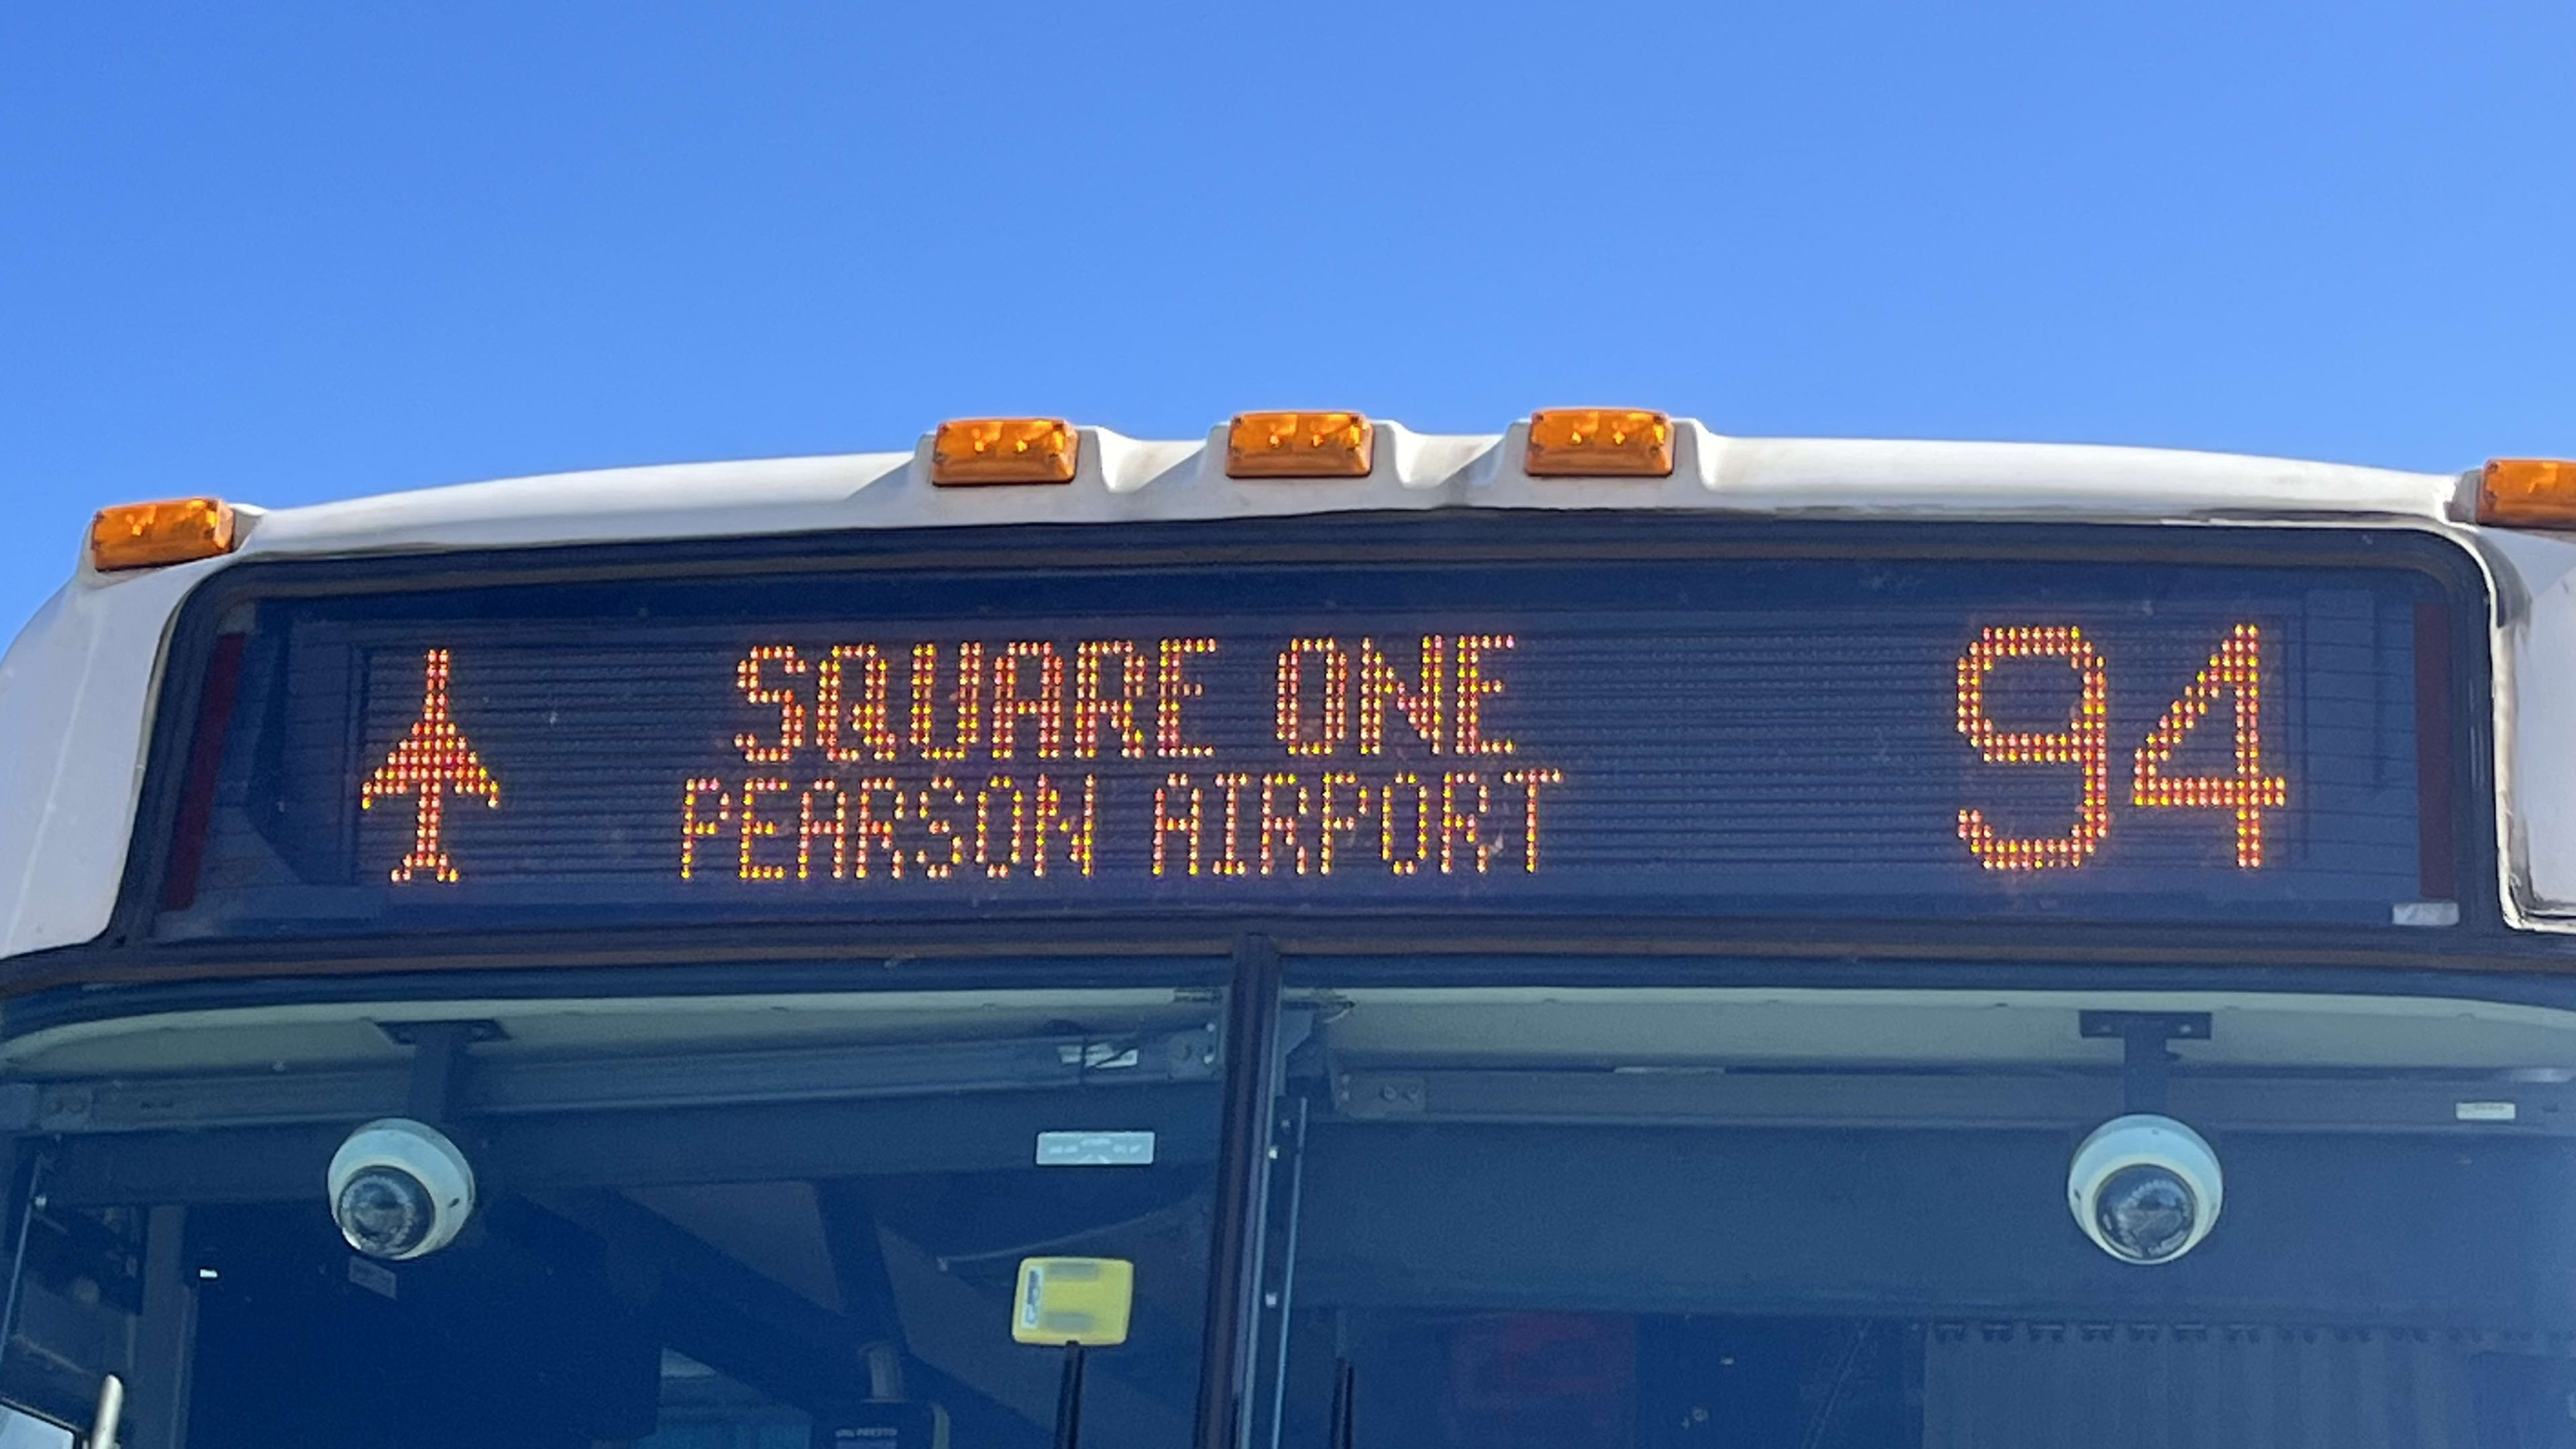 The sign of a GO Bus is displayed